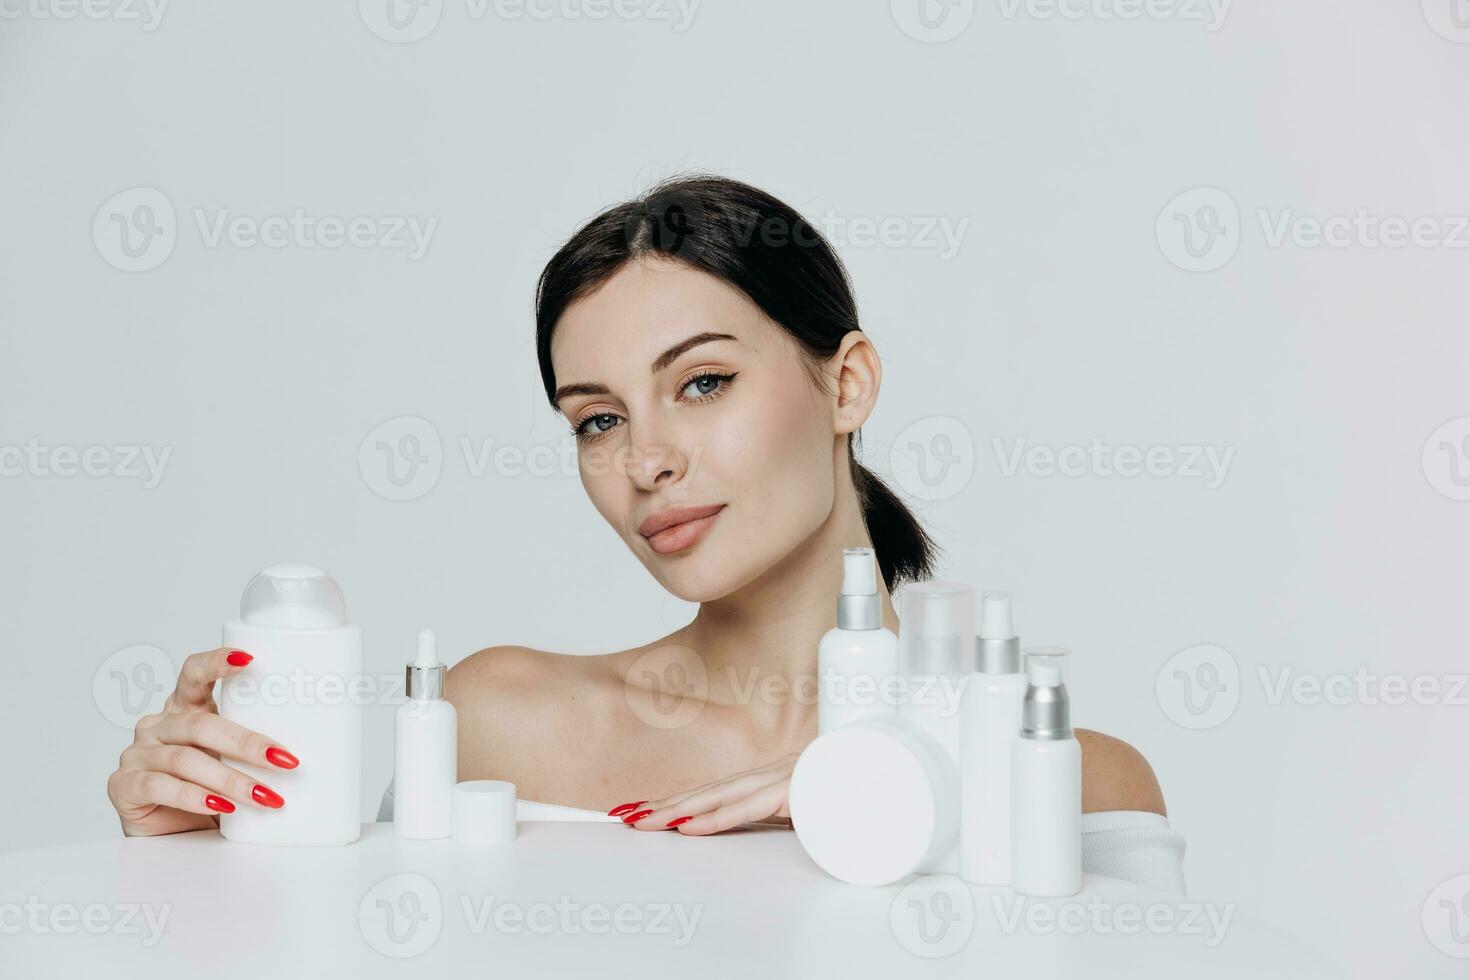 Beautiful young caucasian woman with perfect healthy skin proposing a product. Cosmetic bottles with a white label. Beauty blog, salon concept, minimalism brand packaging mockup photo